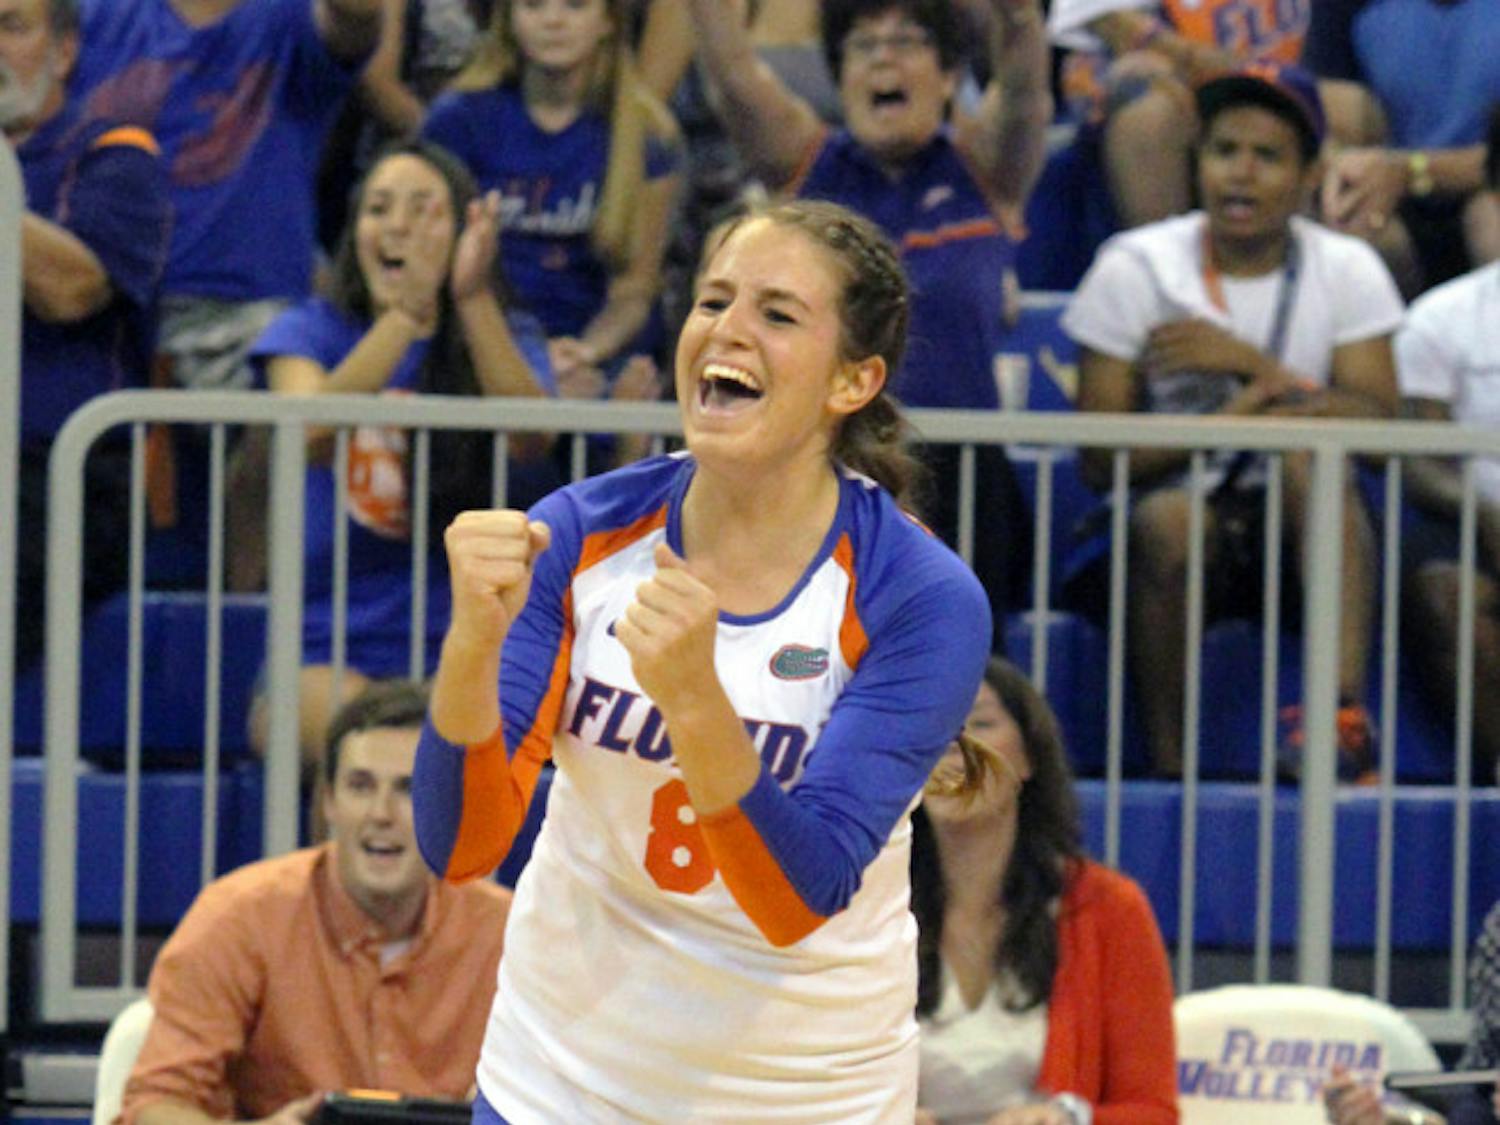 Taylor Brauneis reacts to a play during Florida’s three-set victory against Florida State on Sept. 17 in the O’Connell Center.